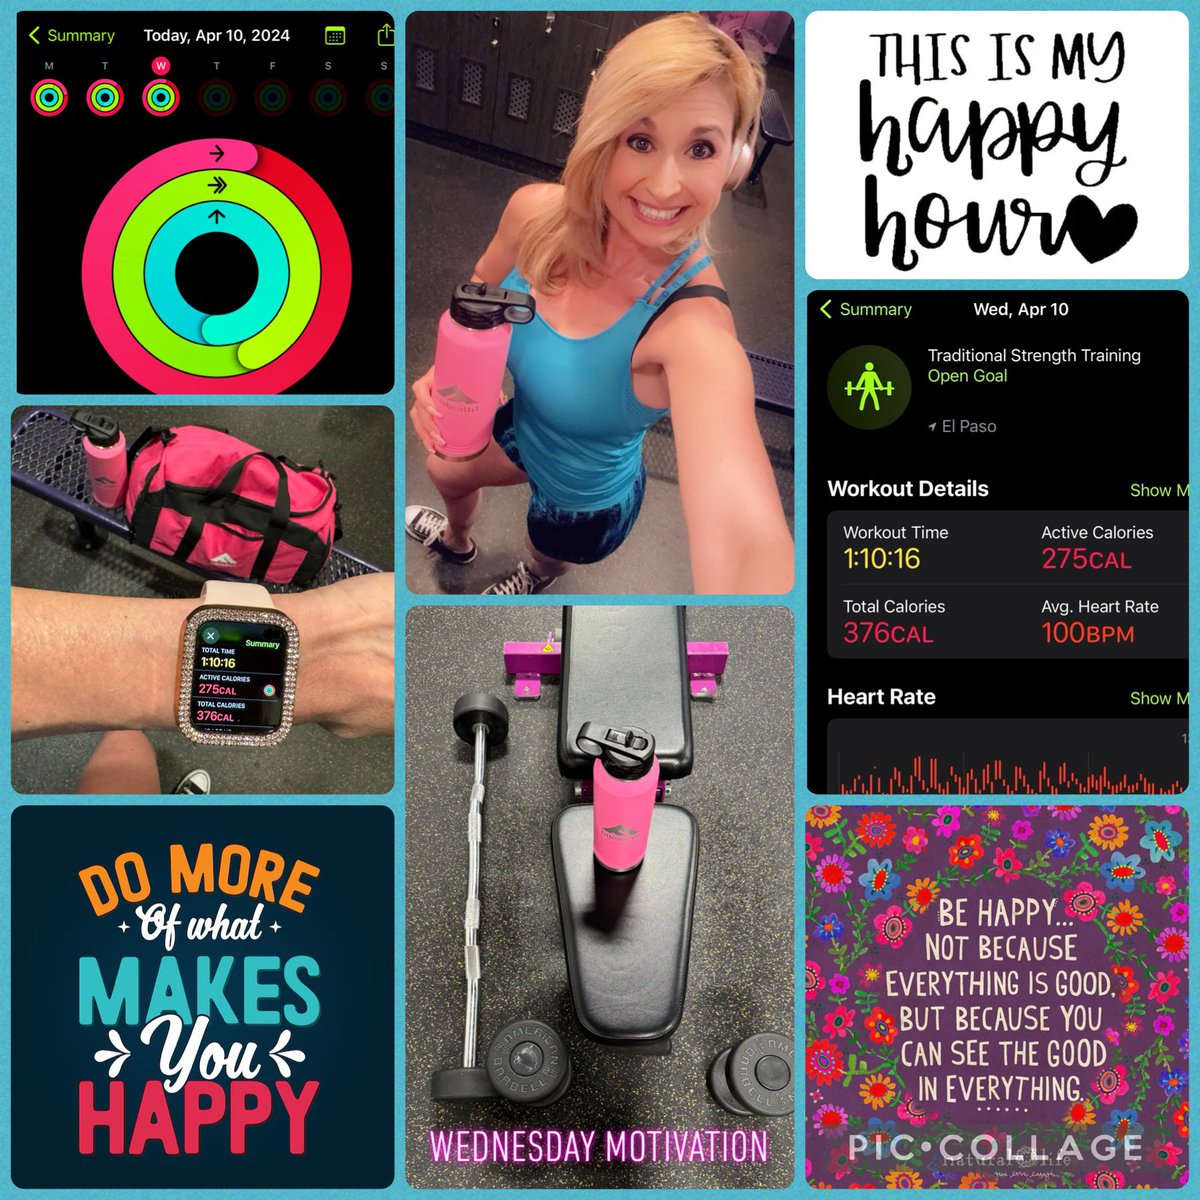 It’s the little things that make life better. The key to a happy life is gratitude! 💞 Do more of what makes you happy! 😊💫💖✨ #BeHappy #Wednesdayvibe #Gratitude #FitLeaders @zjgalvan @PrincipalRoRod @DiocelinaBelle @educategalore @LorenaRubio123 @vggarcia13 @DrSandraHernand